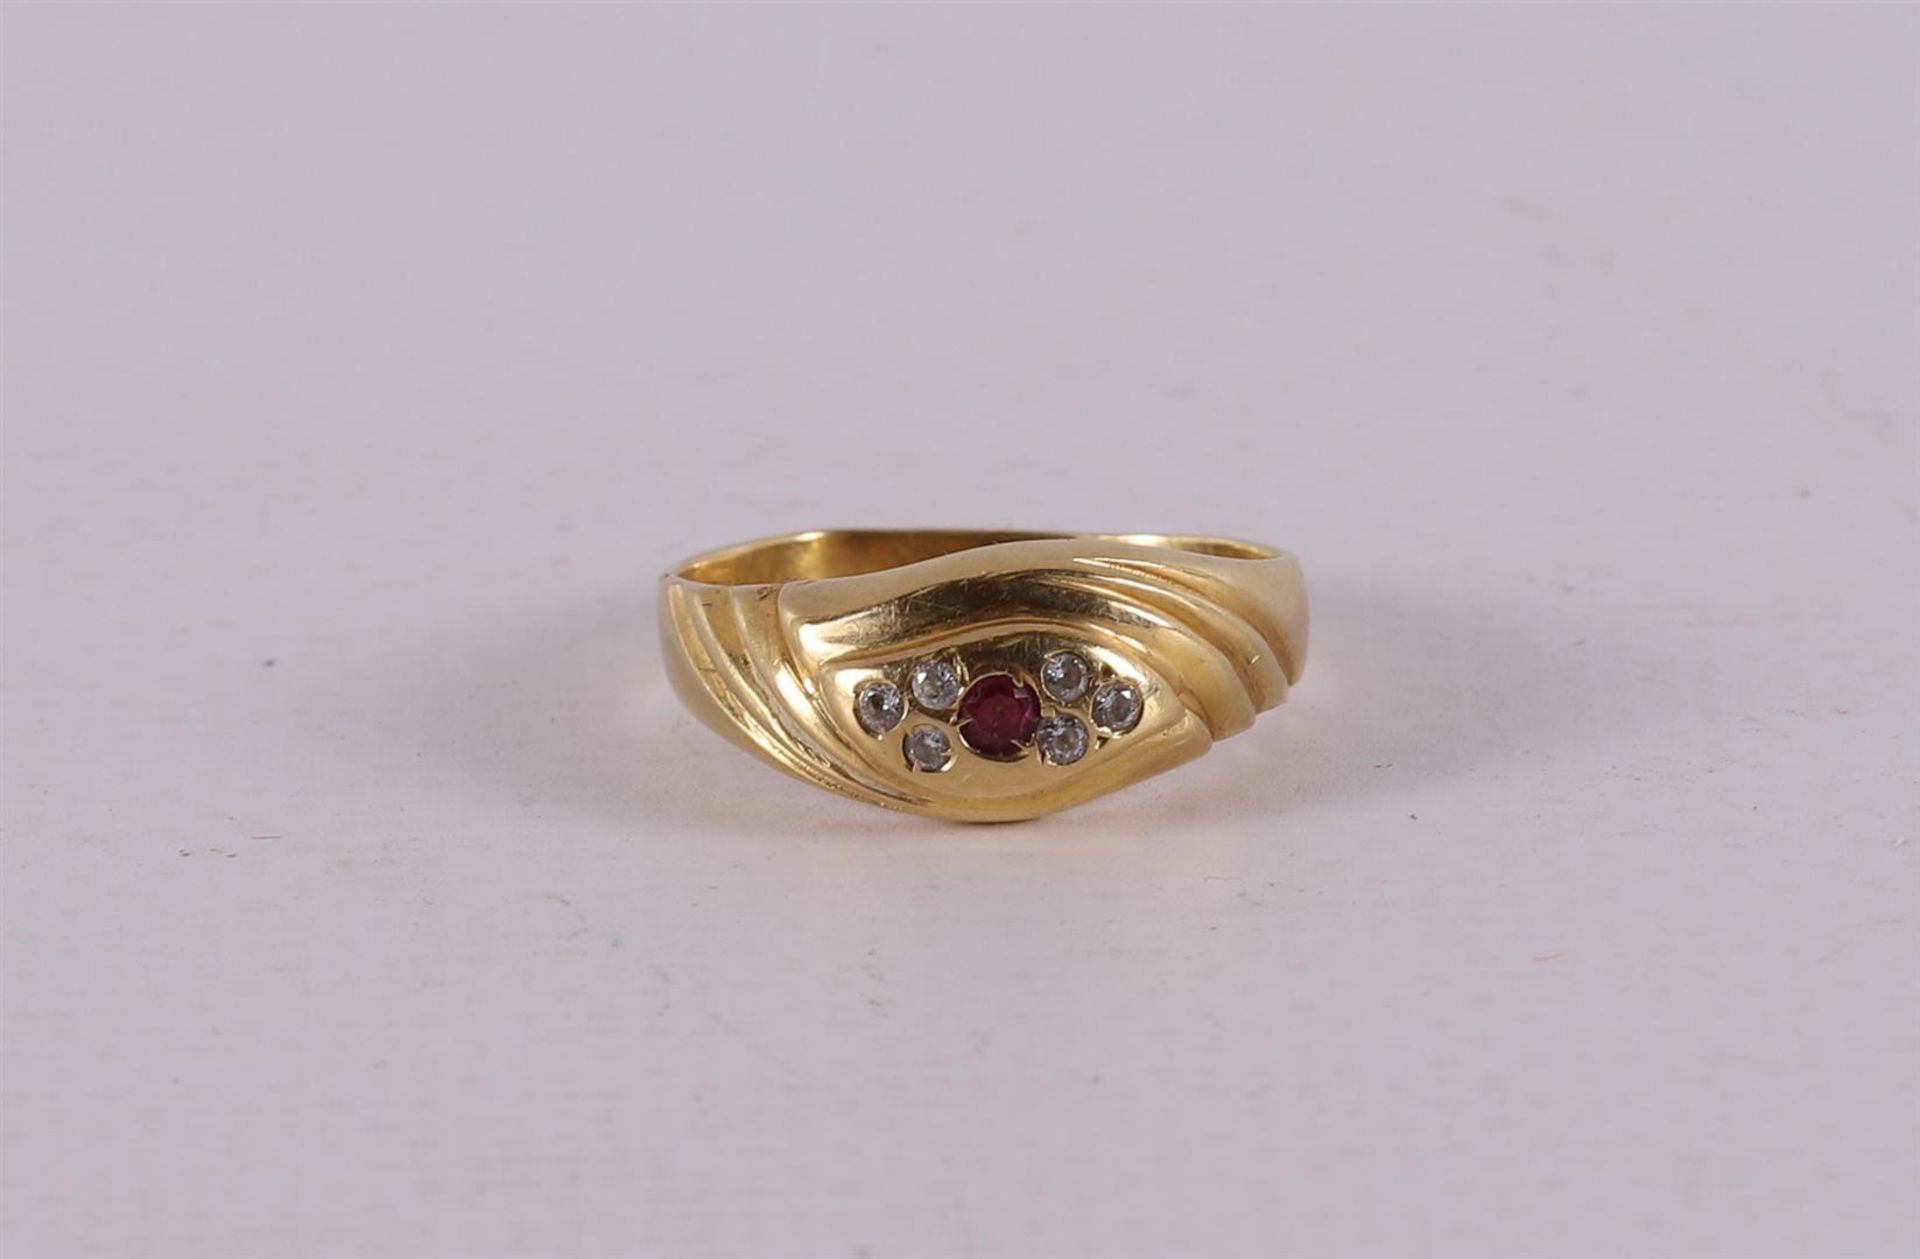 An 18 kt 750/1000 yellow gold women's ring, set with ruby and brilliants.